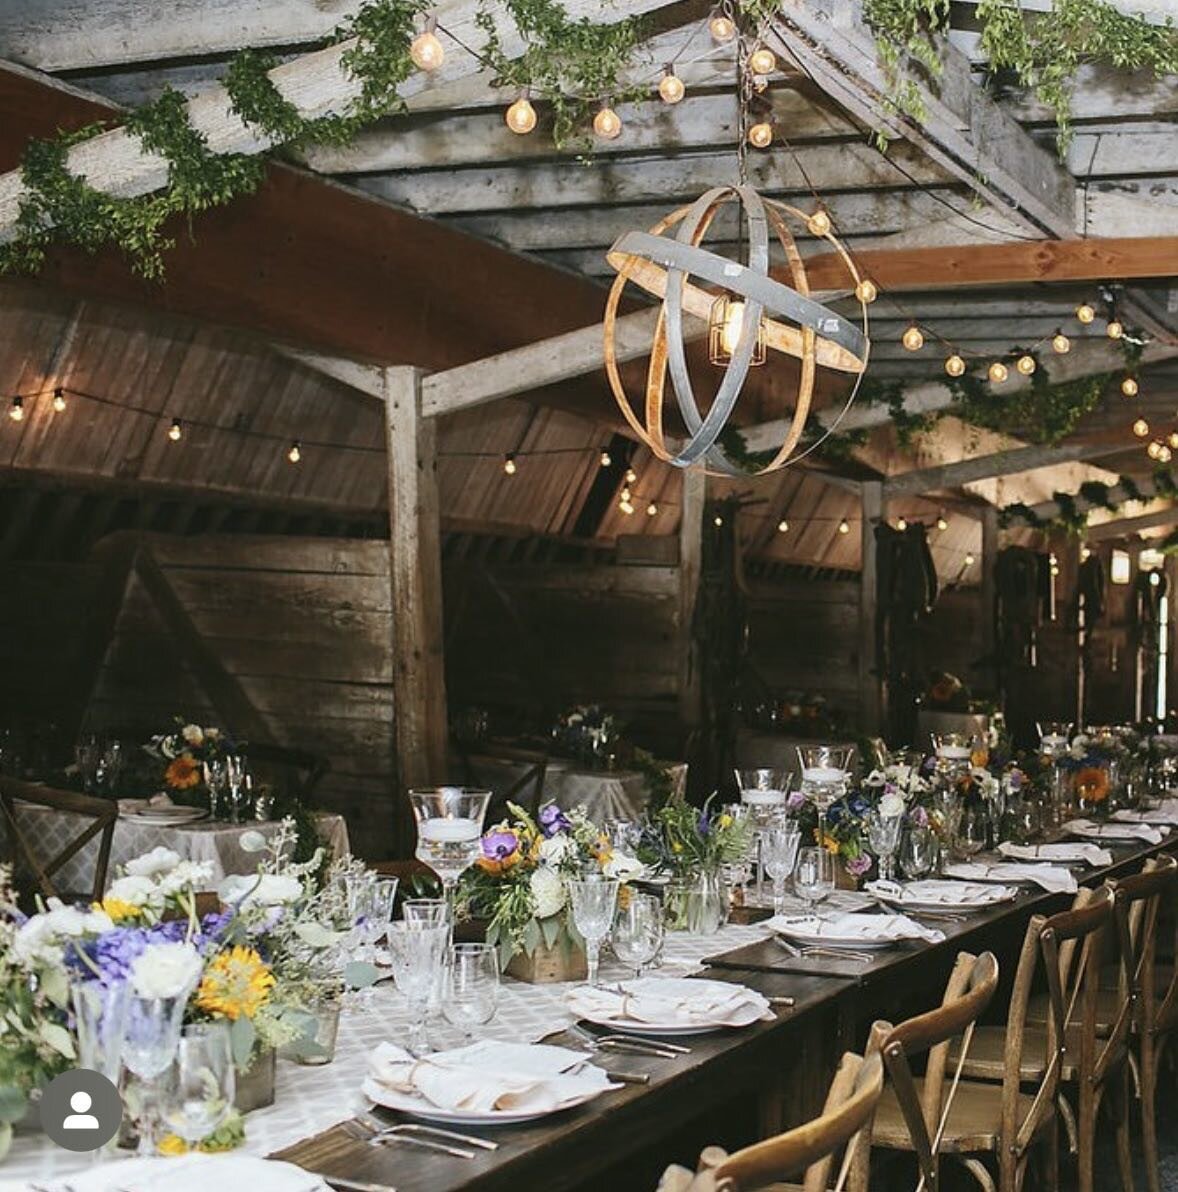 Festive reception dinner in our historic barn. Such a beautiful setting for your special event!

#rusticwedding #bayareawedding #eastbaywedding #ranchwedding #bayareaevents #barnwedding #ranchevents